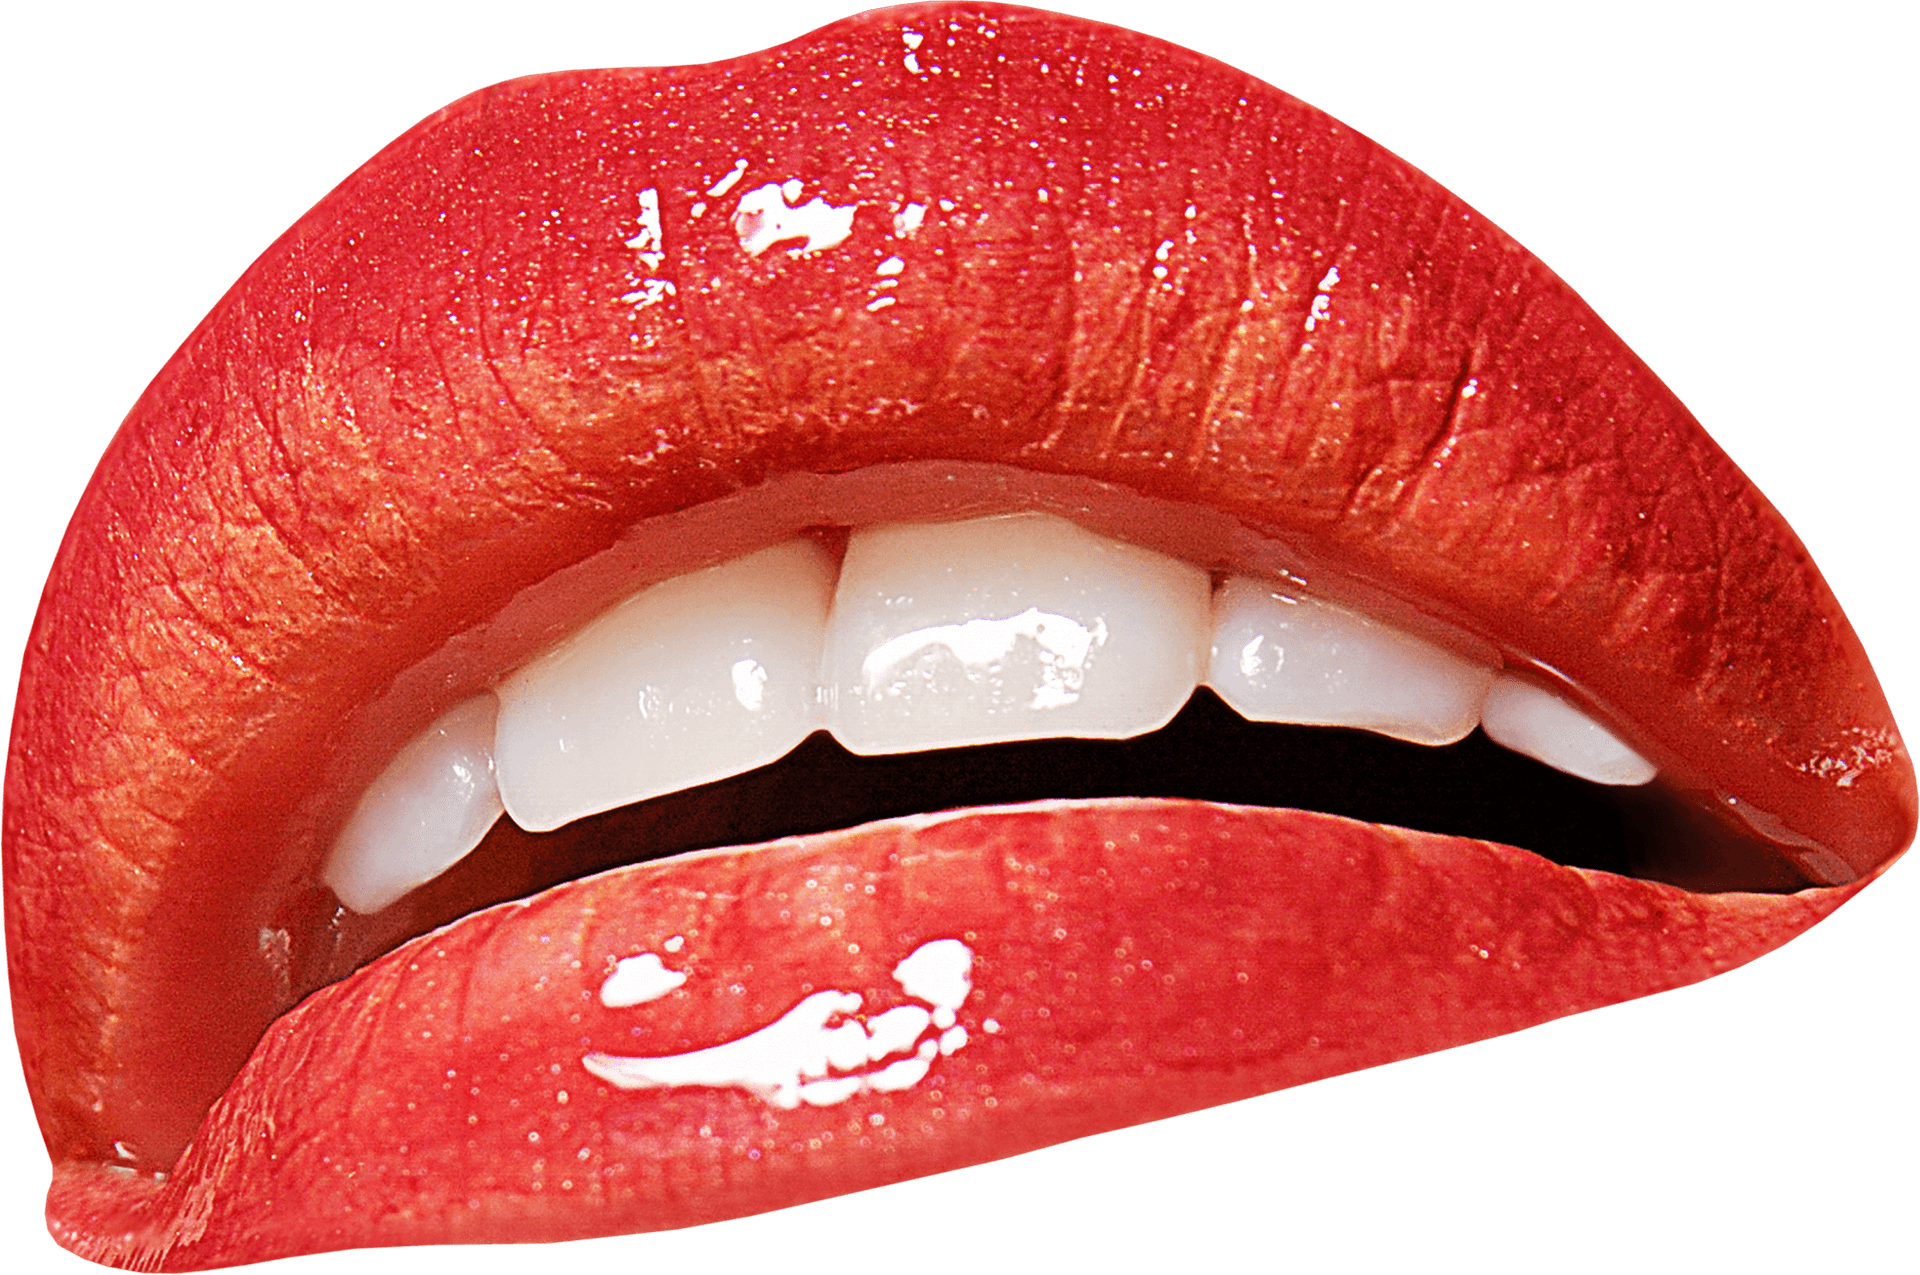 Glossy Red Lips Closeup.png PNG image